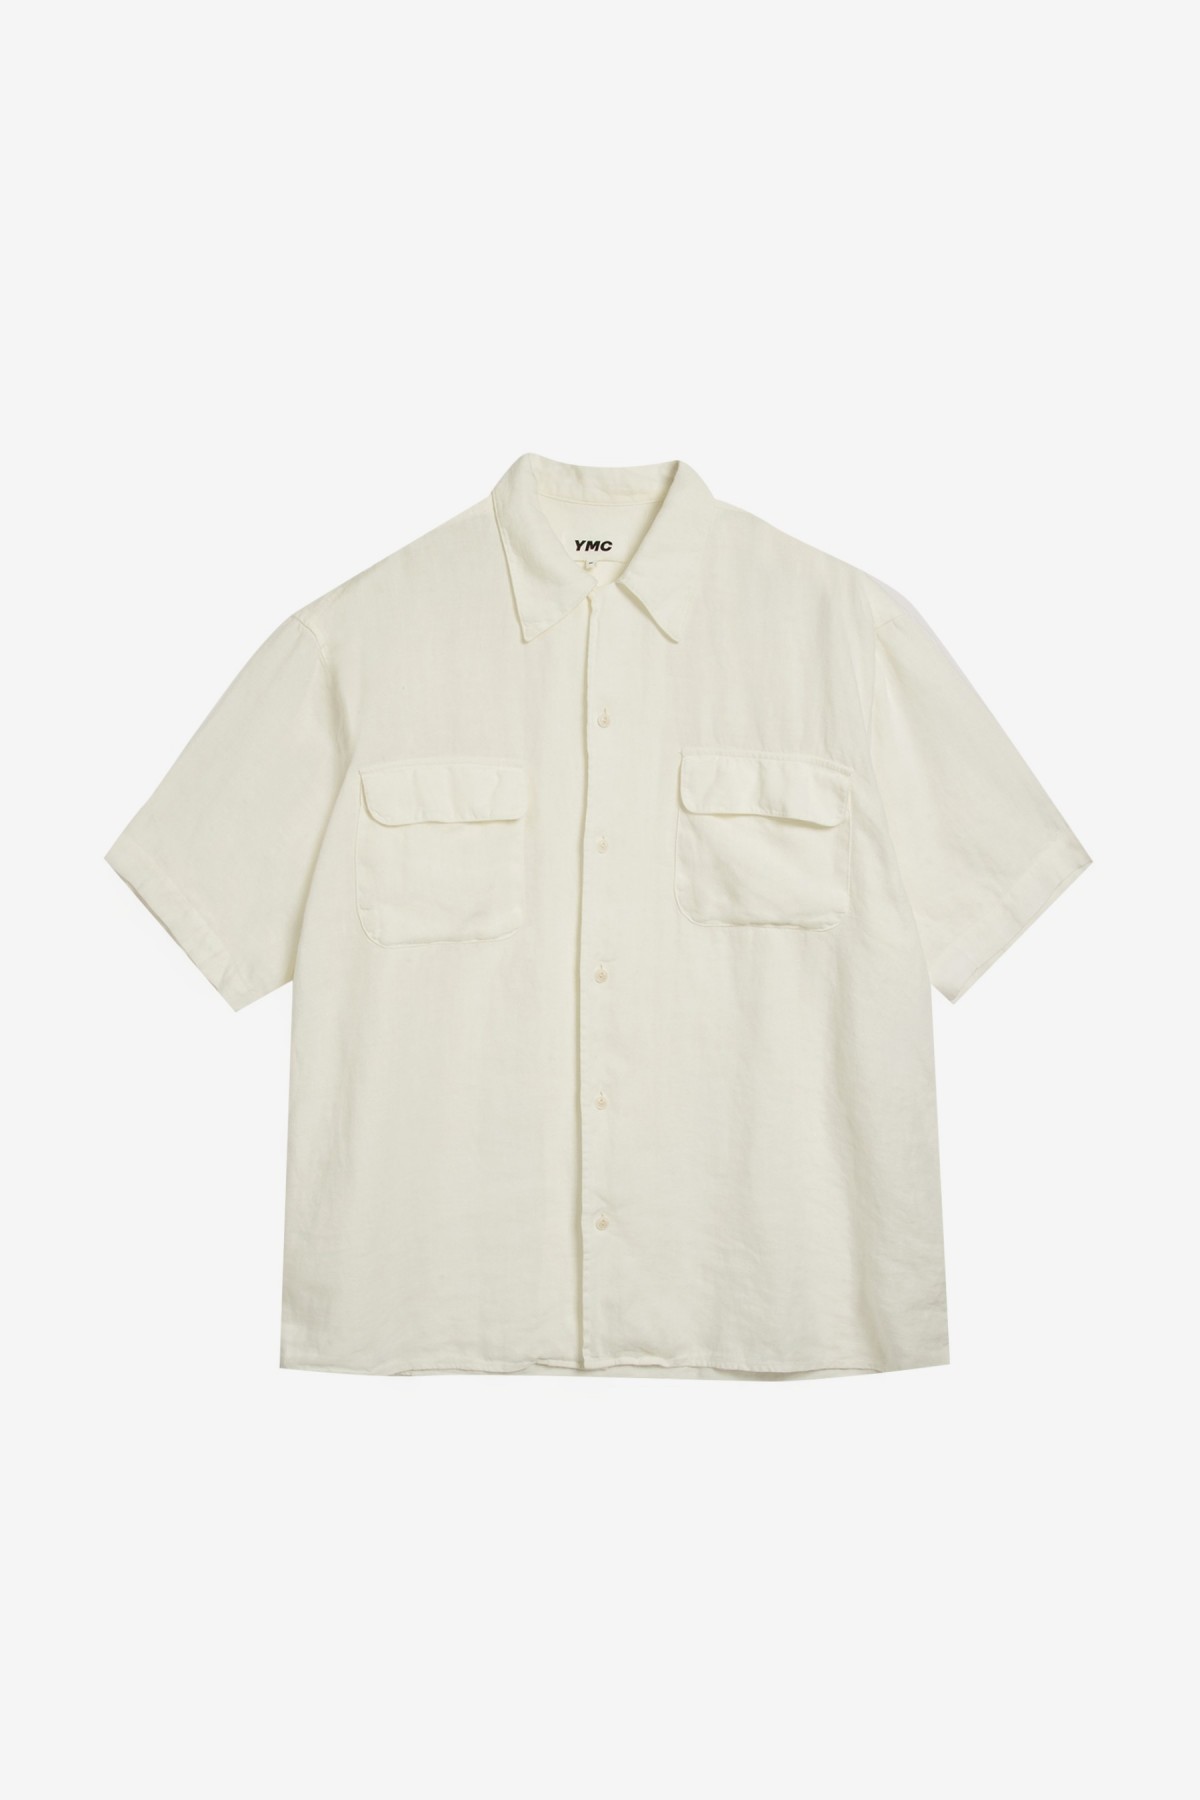 YMC You Must Create Wray Short Sleeve Shirt in White